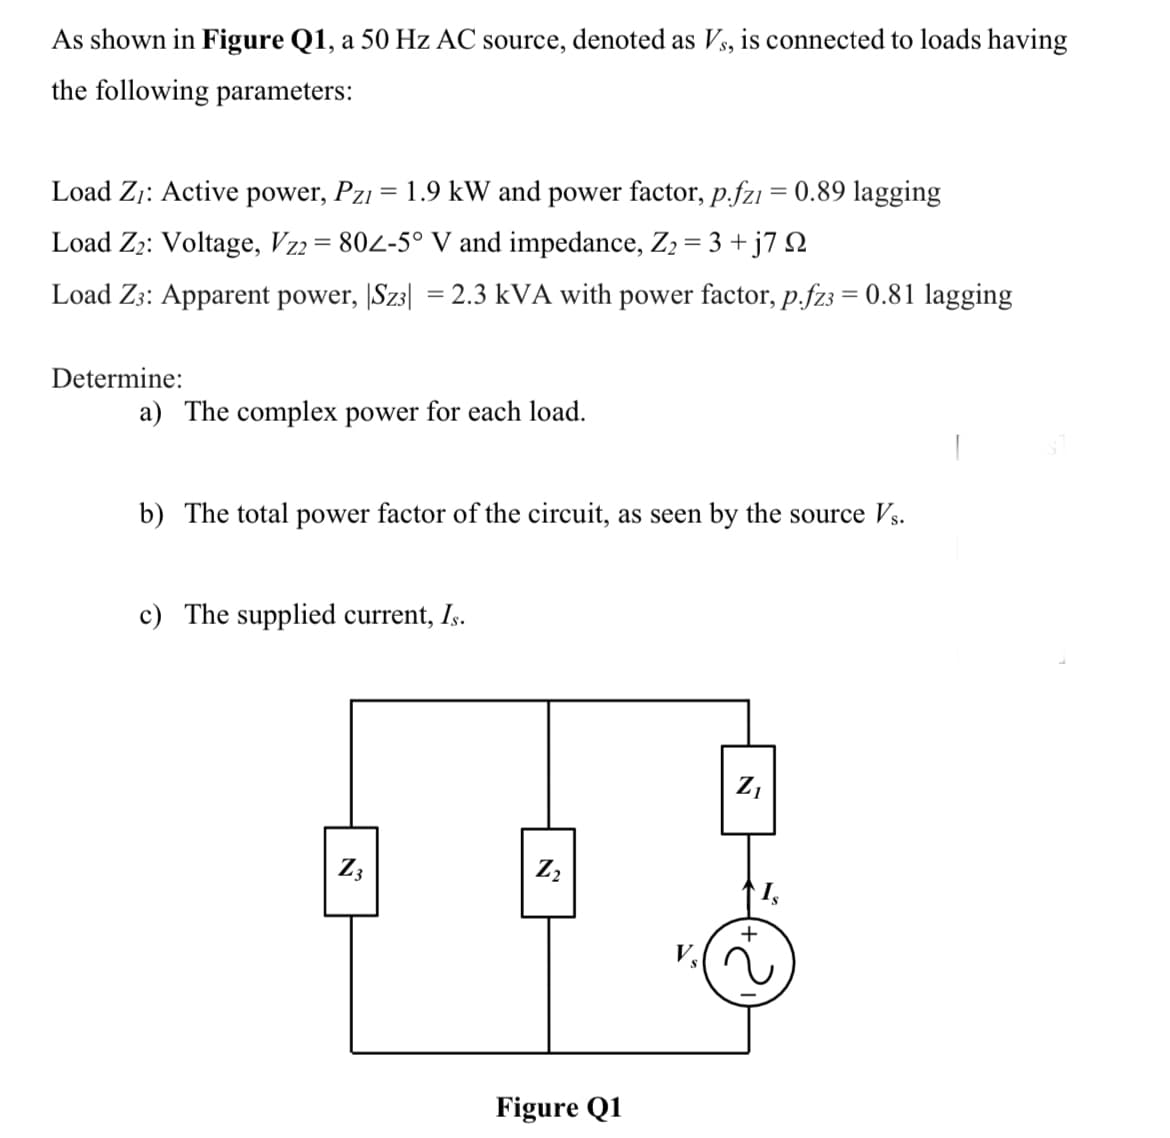 As shown in Figure Q1, a 50 Hz AC source, denoted as Vs, is connected to loads having
the following parameters:
Load Z;: Active power, Pzi = 1.9 kW and power factor, p.fz1 = 0.89 lagging
Load Z2: Voltage, Vz2= 802-5° V and impedance, Z2 = 3 + j7 N
Load Z3: Apparent power, |Sz3| = 2.3 kVA with power factor, p.fz3 = 0.81 lagging
Determine:
a) The complex power for each load.
b) The total power factor of the circuit, as seen by the source Vs.
c) The supplied current, Is.
Z,
Z3
Figure Q1
